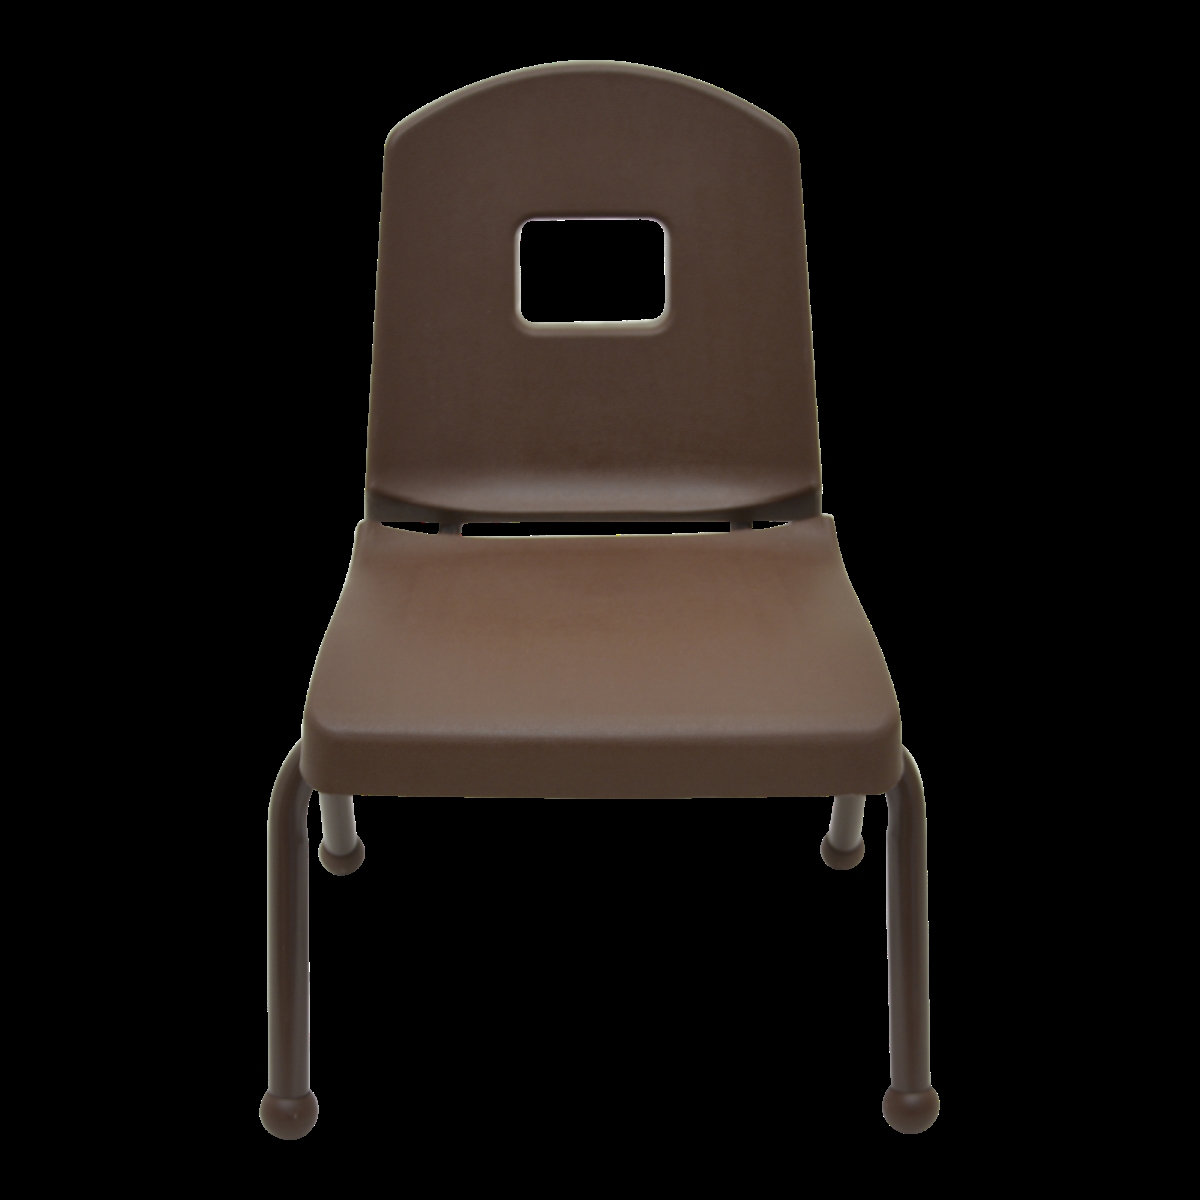 12chrb-bn-6pk 12 In. Creative Color Split Bucket Chair With Matching Ball Glide In Brown - Pack Of 6